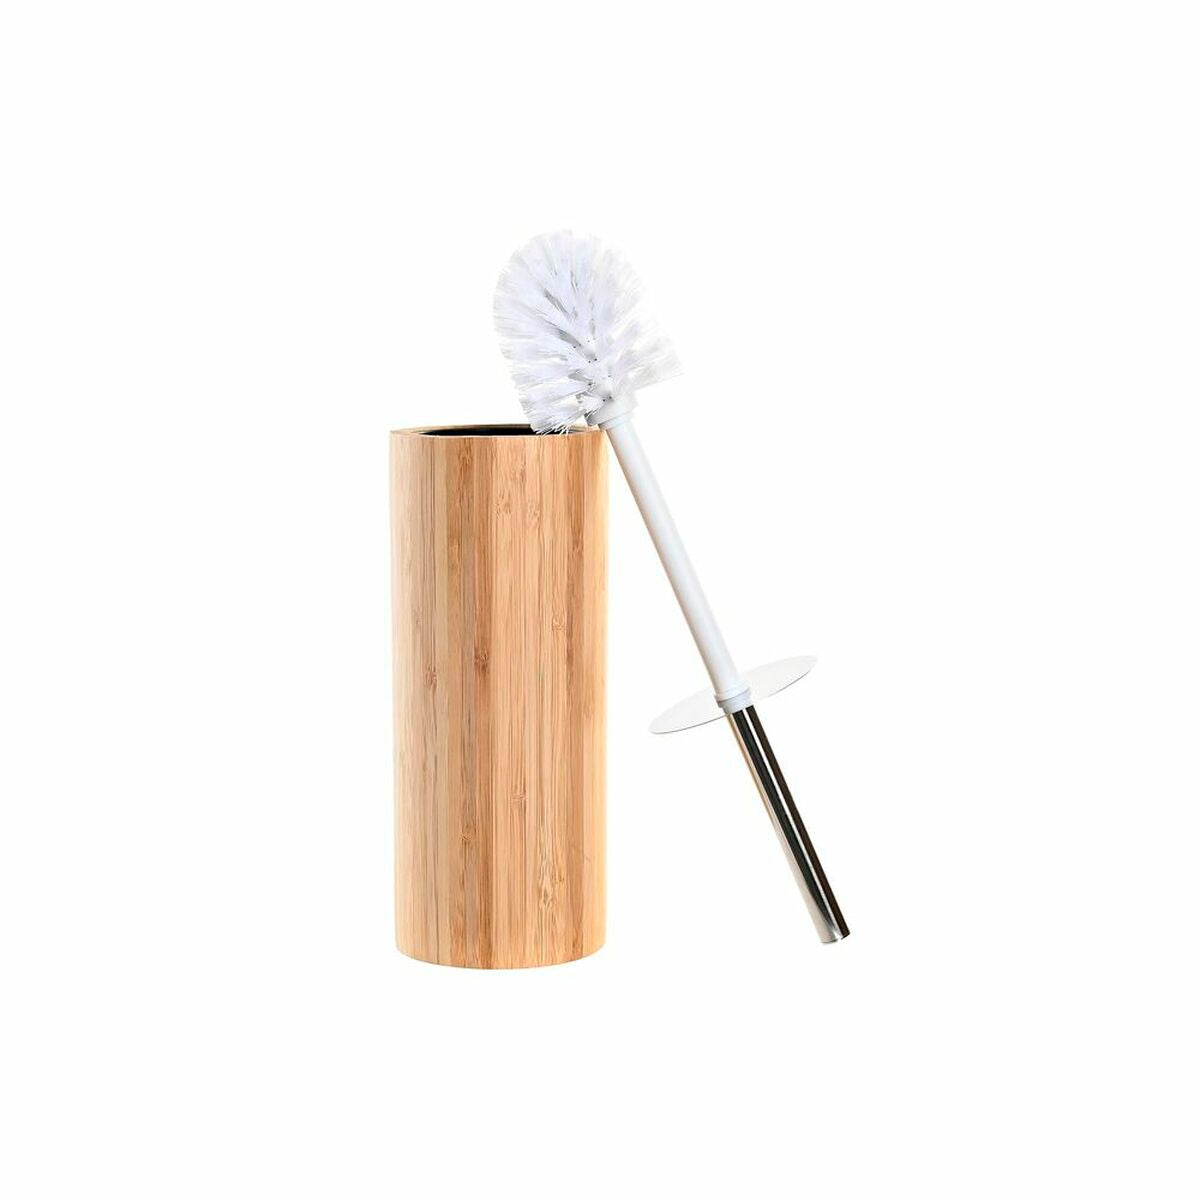 Toilet Brush DKD Home Decor Silver Natural Metal Bamboo 10 x 10 x 36,8 cm